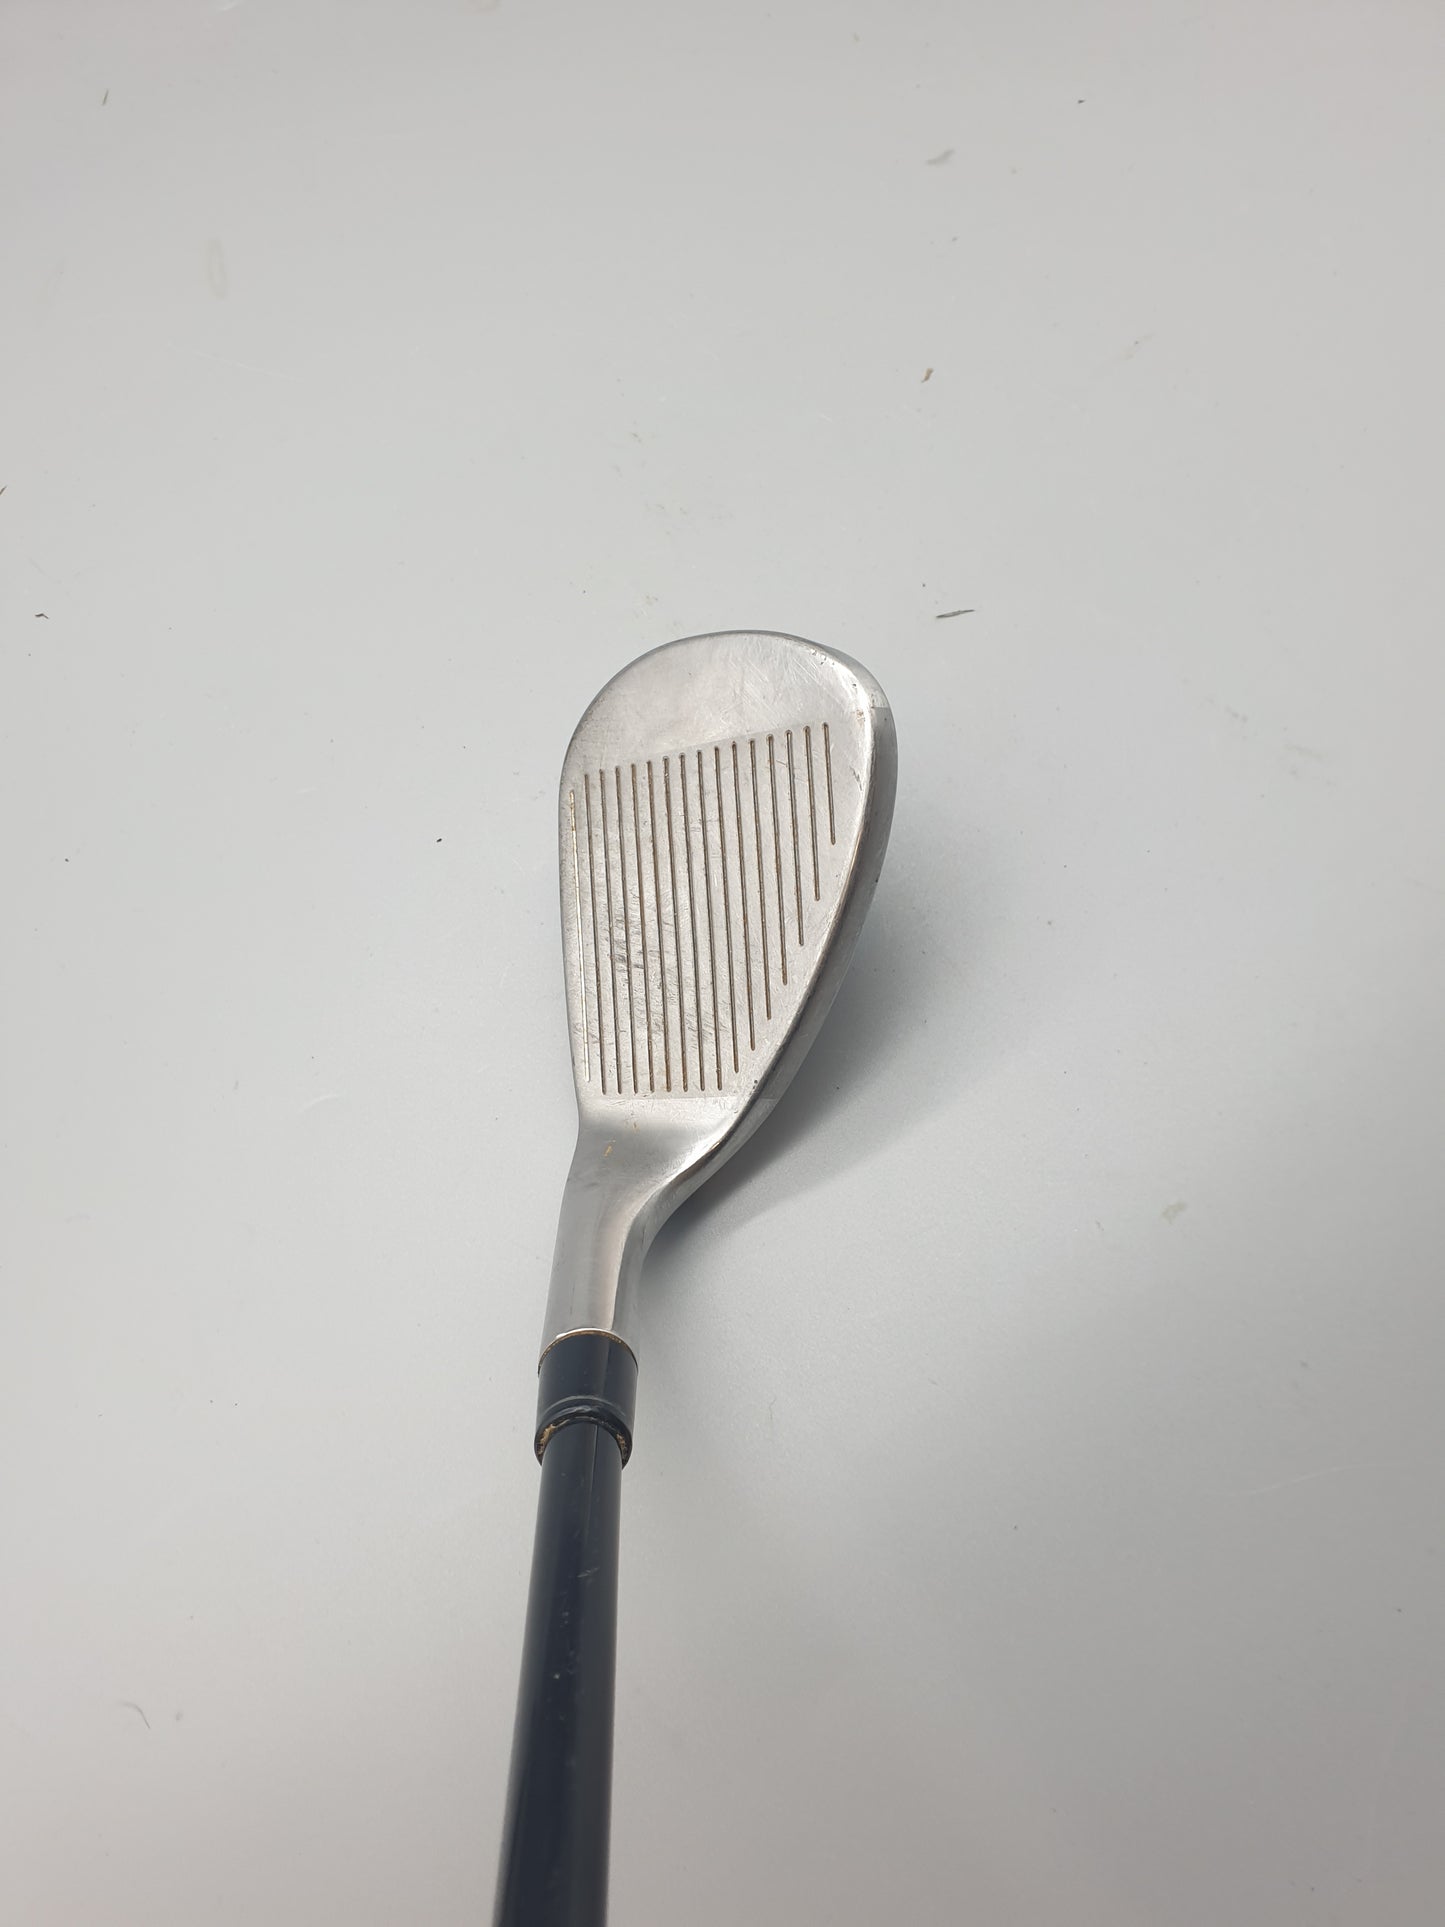 Taylormade Stealth Sand Wedge Ventus 6-R Right Hand - Used